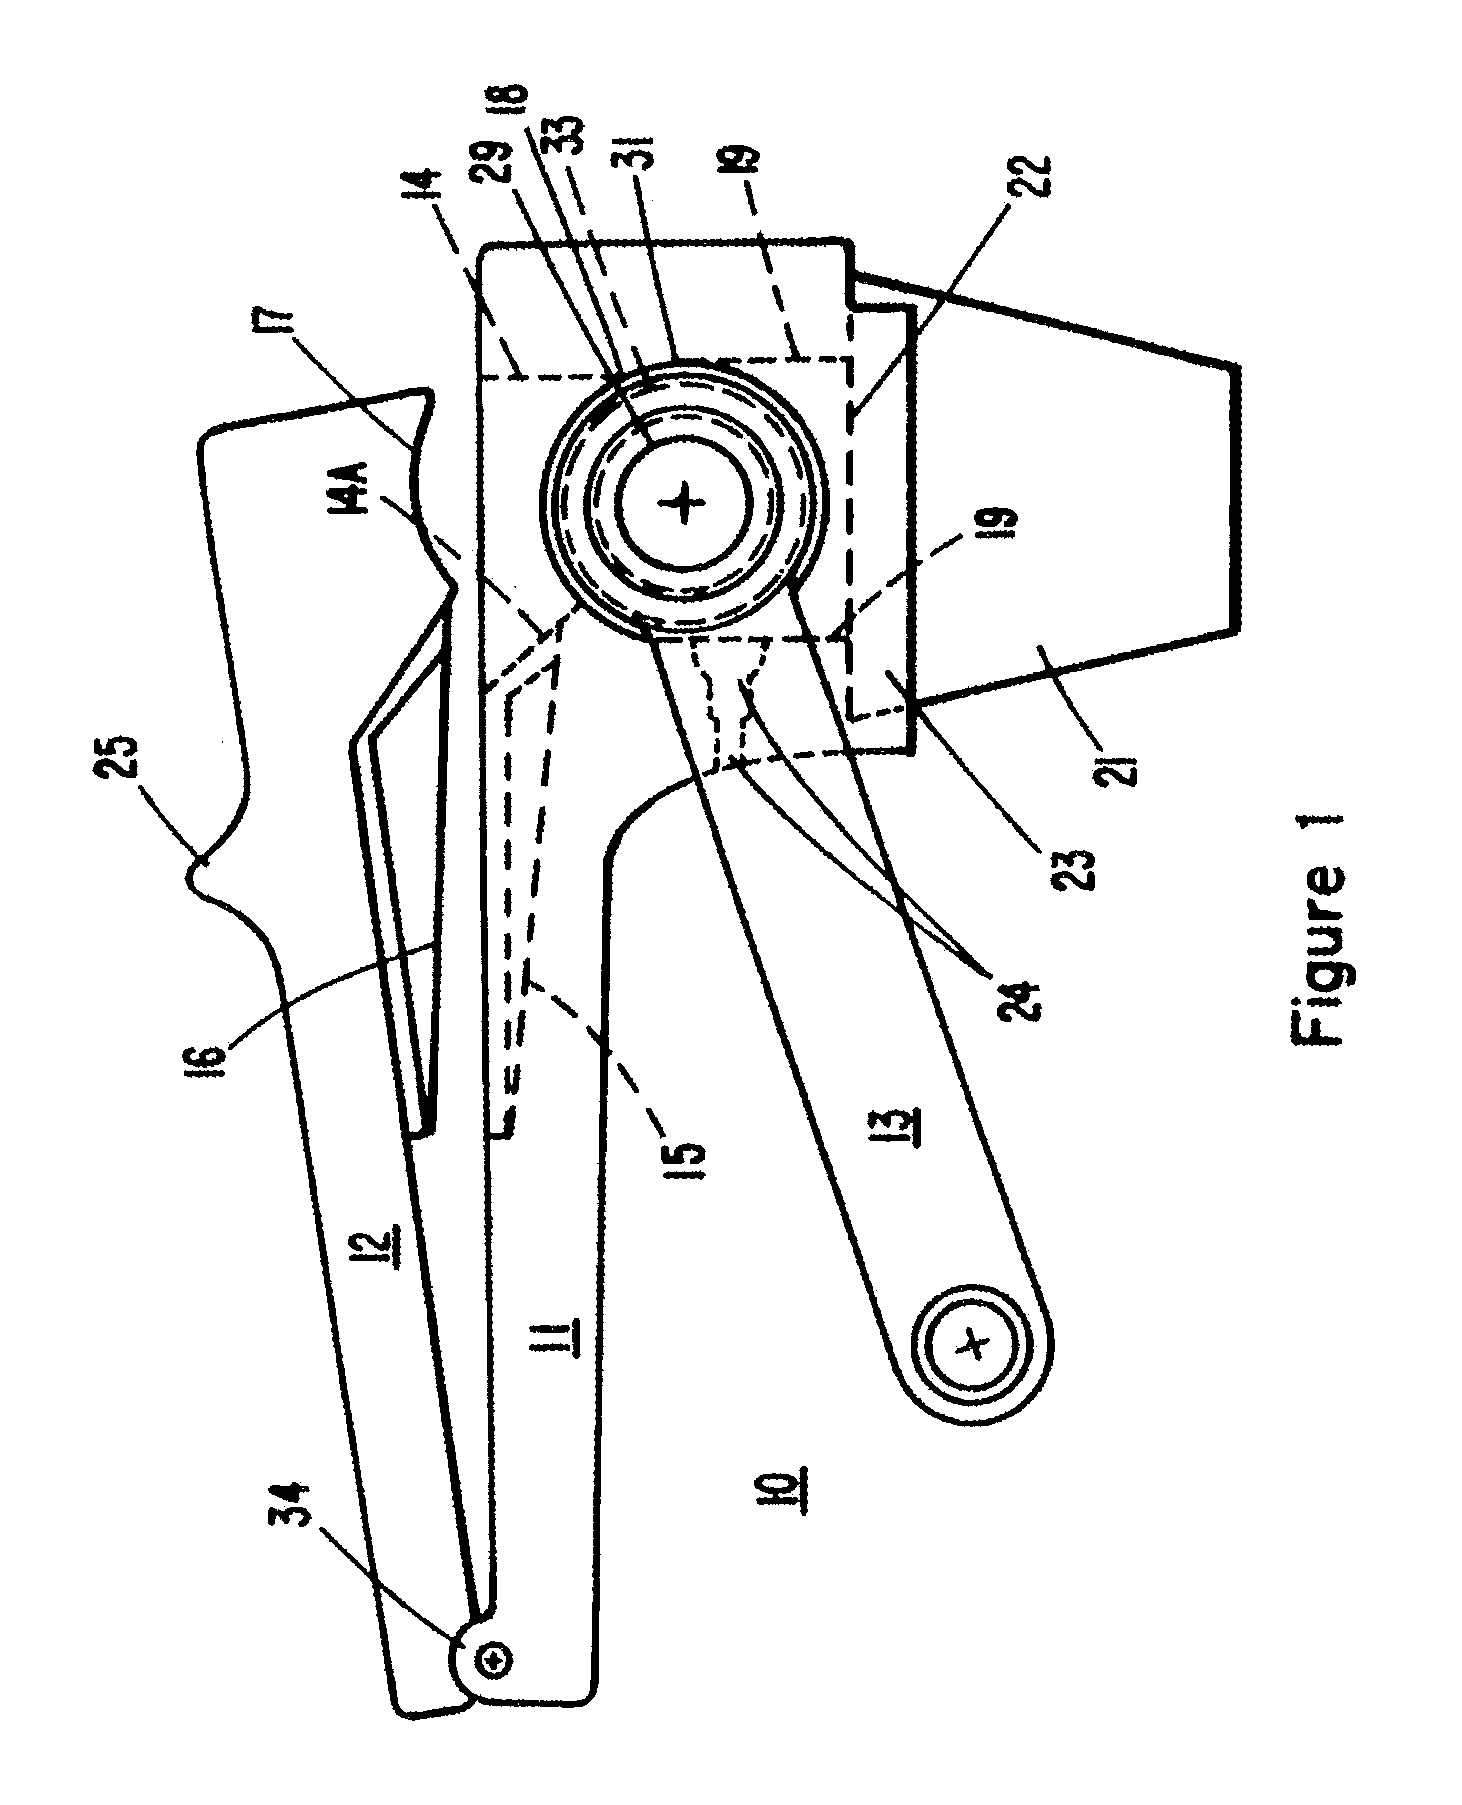 Apparatus for decomposting compressed tablets